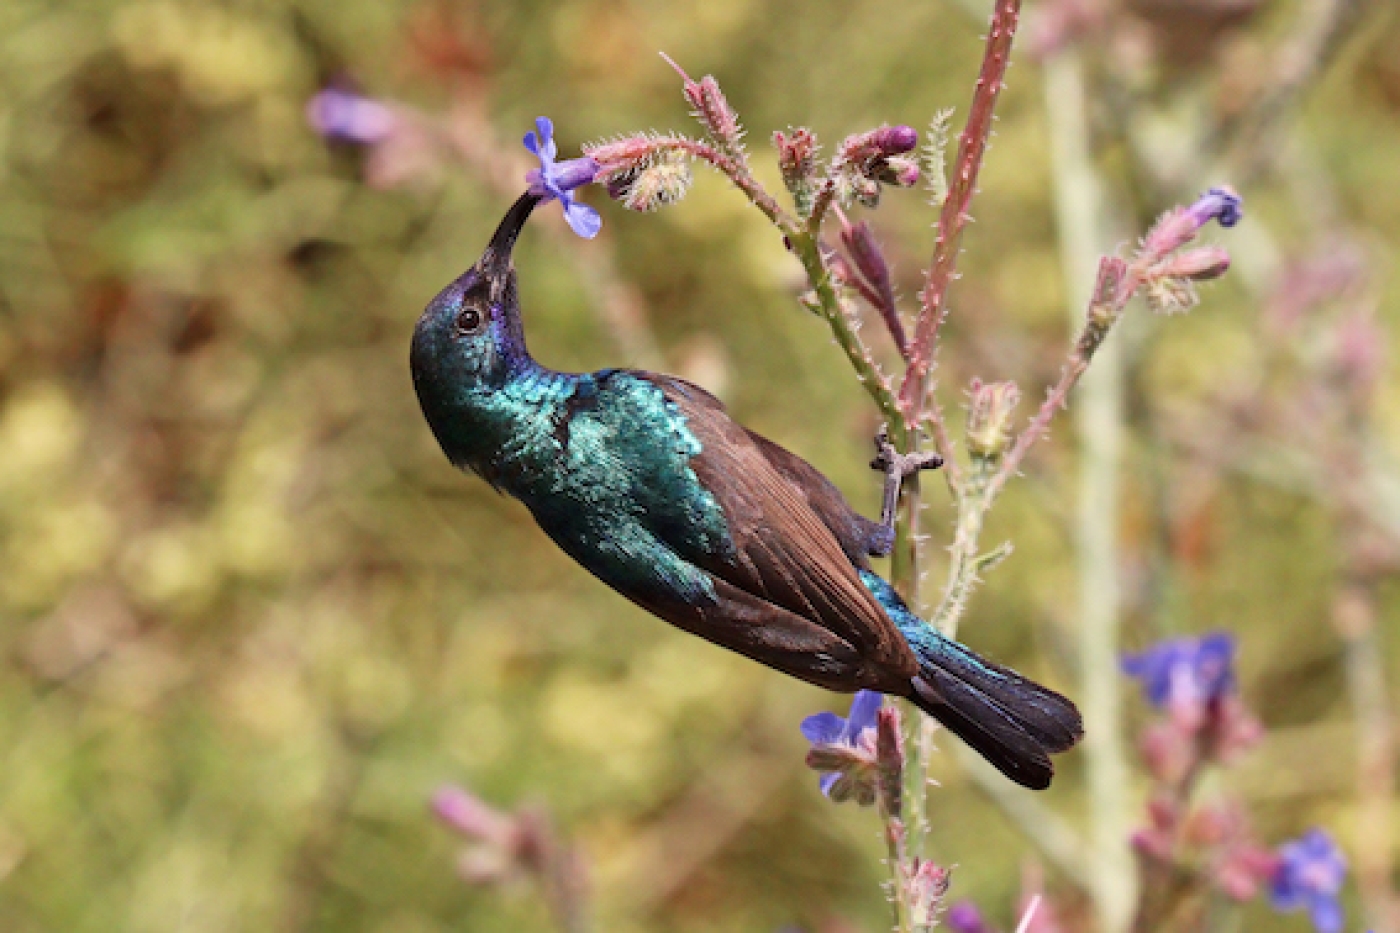 The Palestine sunbird was adopted by the Palestine Authority as the national bird in 2015 (Wikimedia)